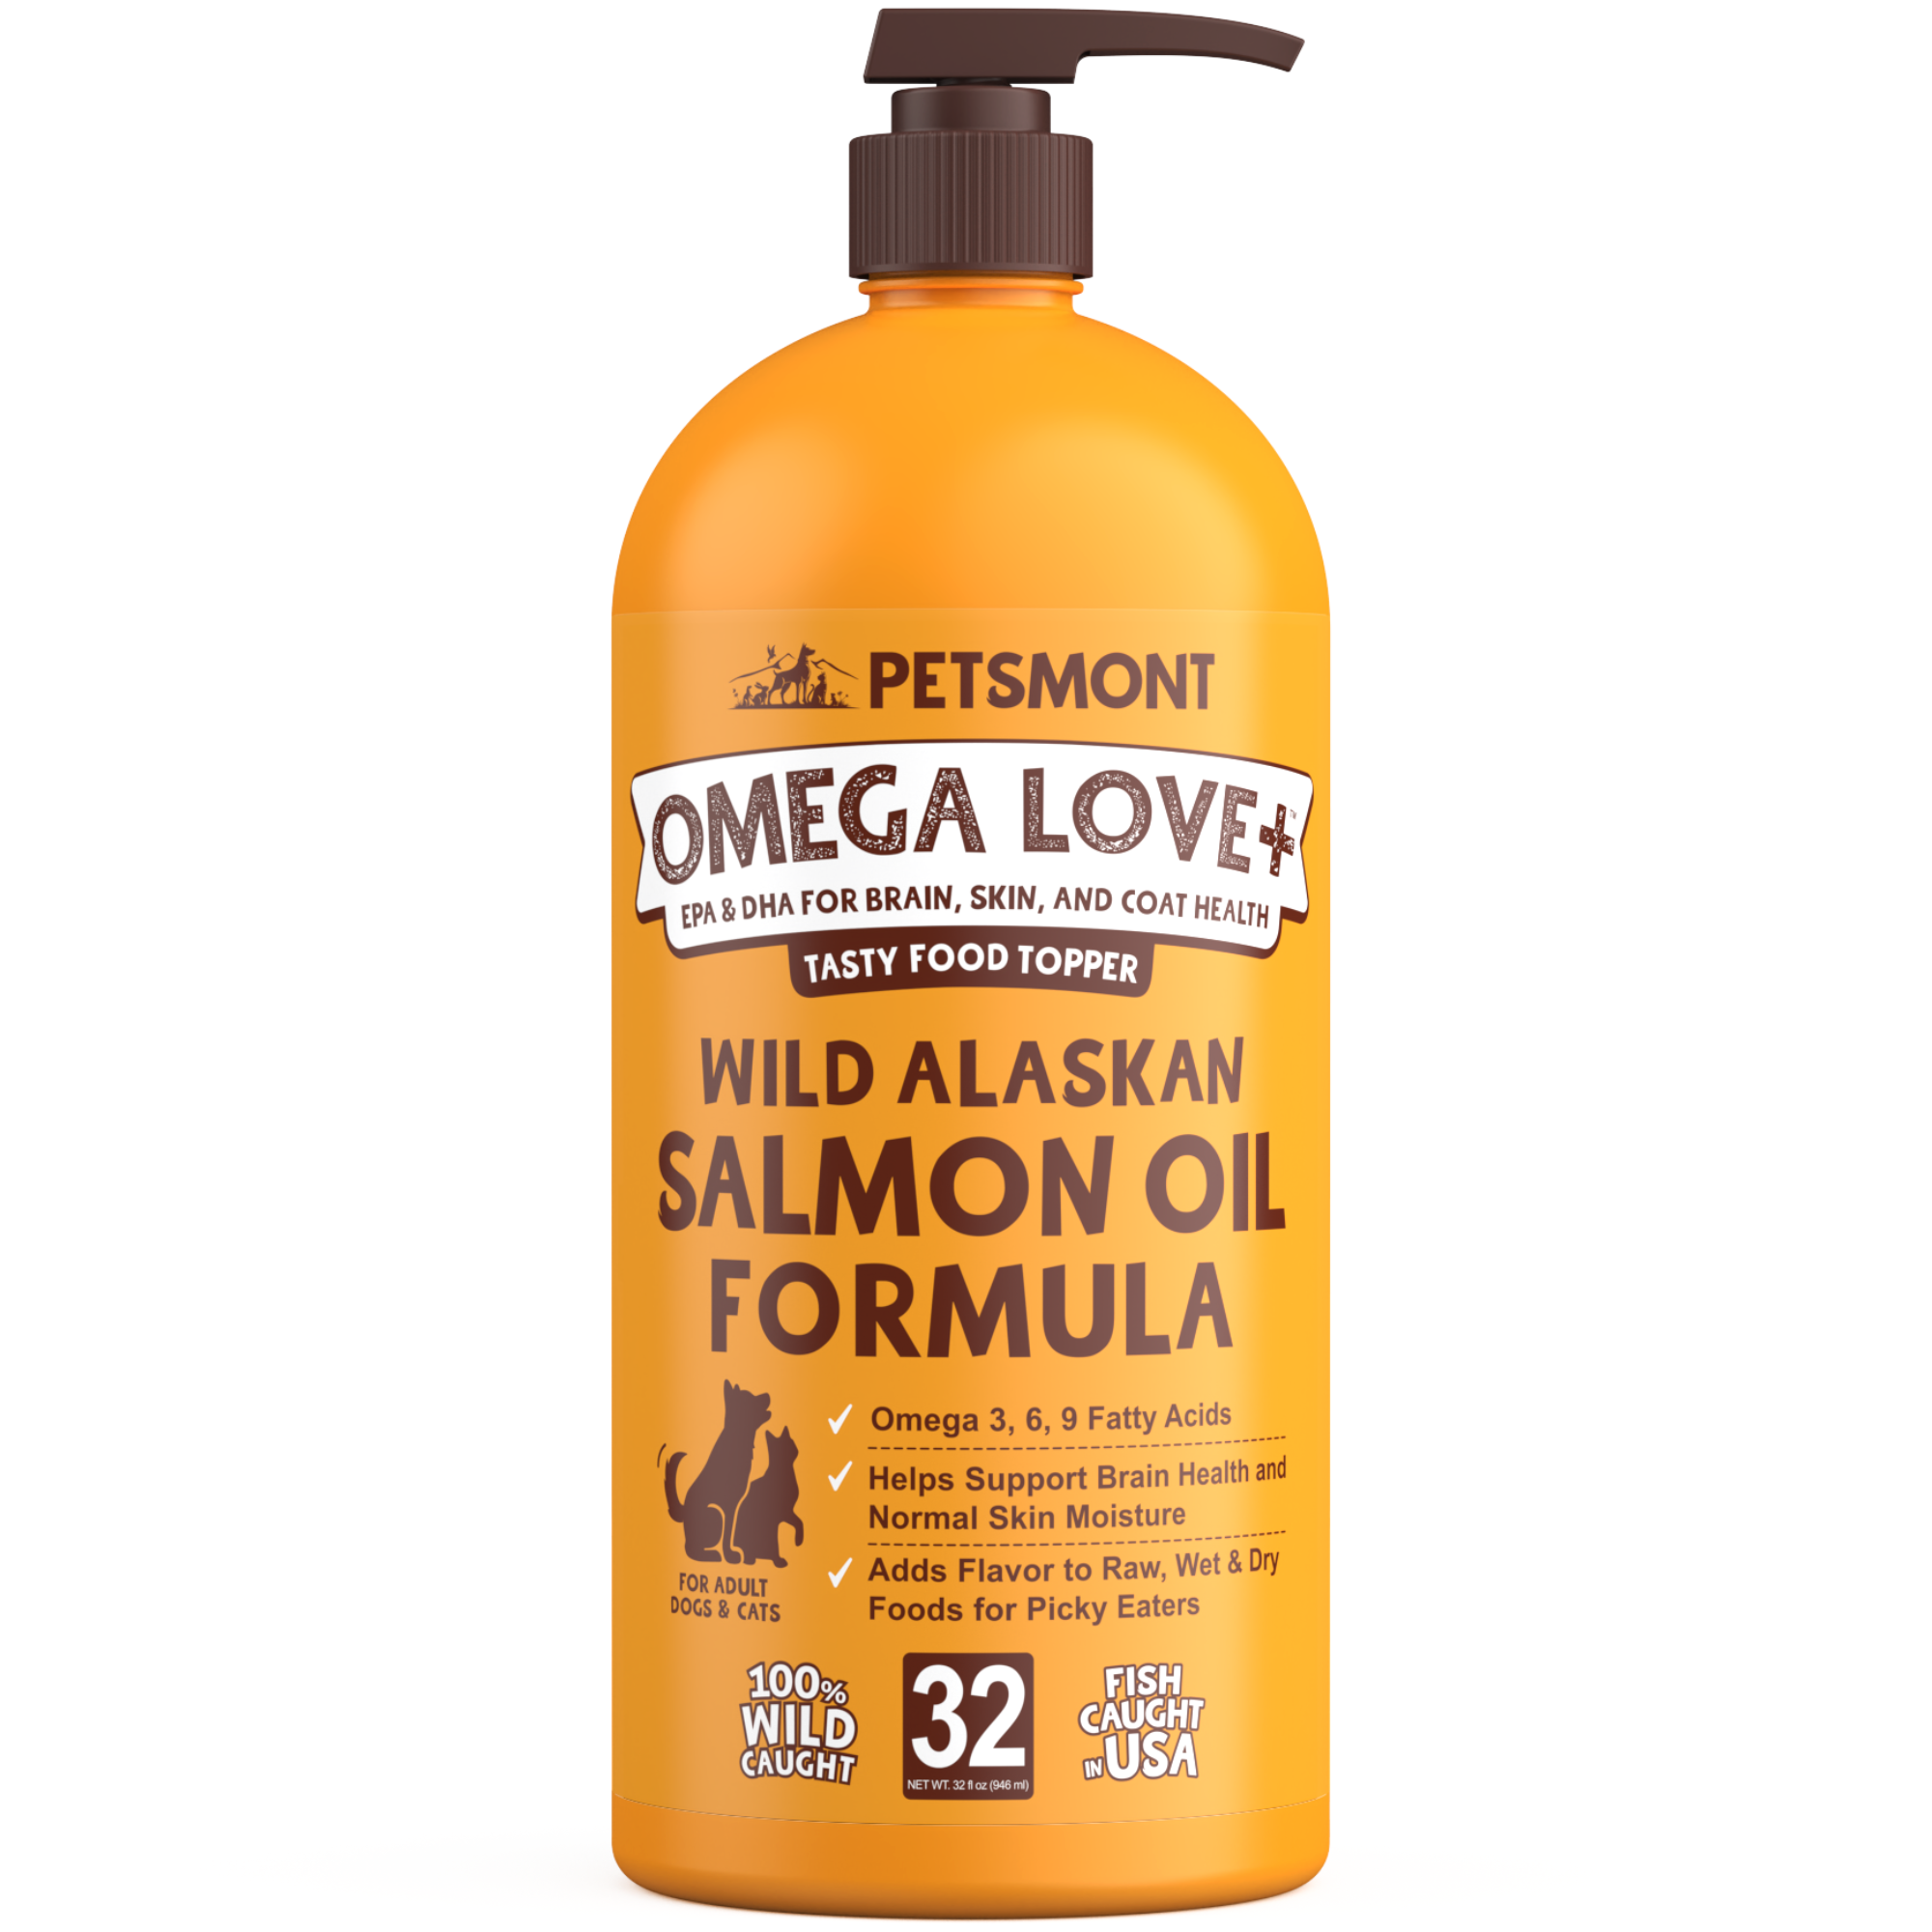 Wild Alaskan Salmon Oil for Dogs & Cats - Omega 3 Skin & Coat Support -  Liquid Food Supplement for Pets - Natural EPA + DHA Fatty Acids for Joint  Function, Immune & Heart Health, 32 Fl Oz : Pet Supplies 